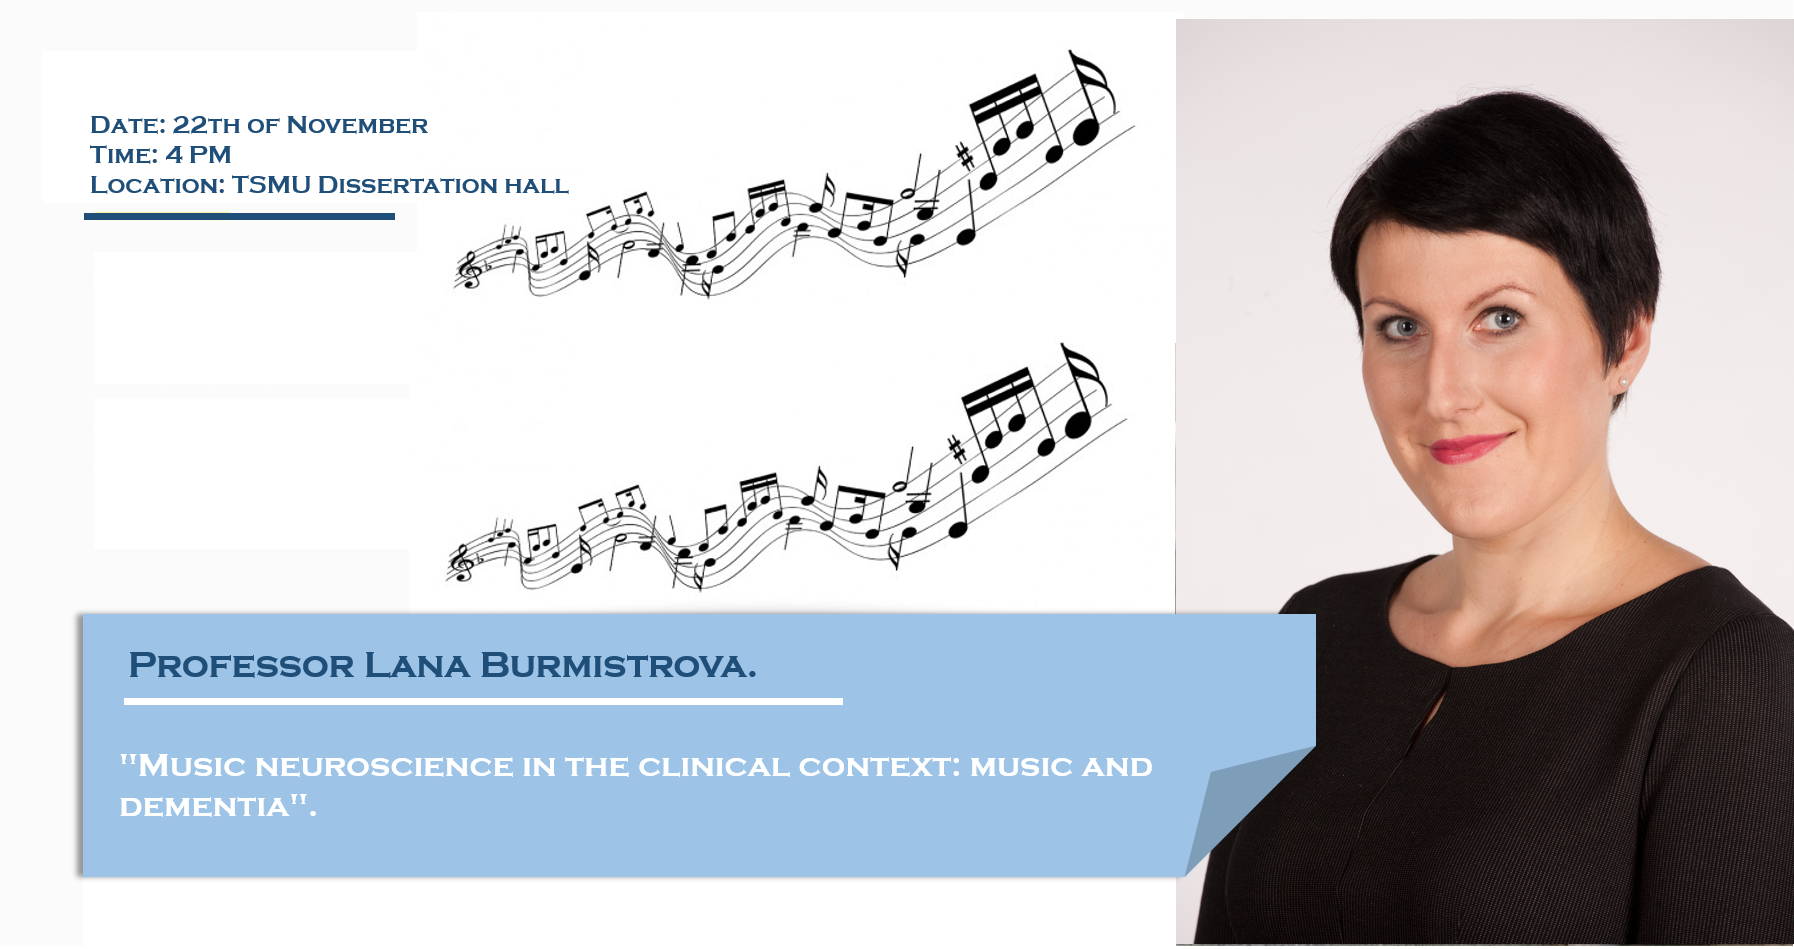 Music neuroscience in the clinical context: music and dementia